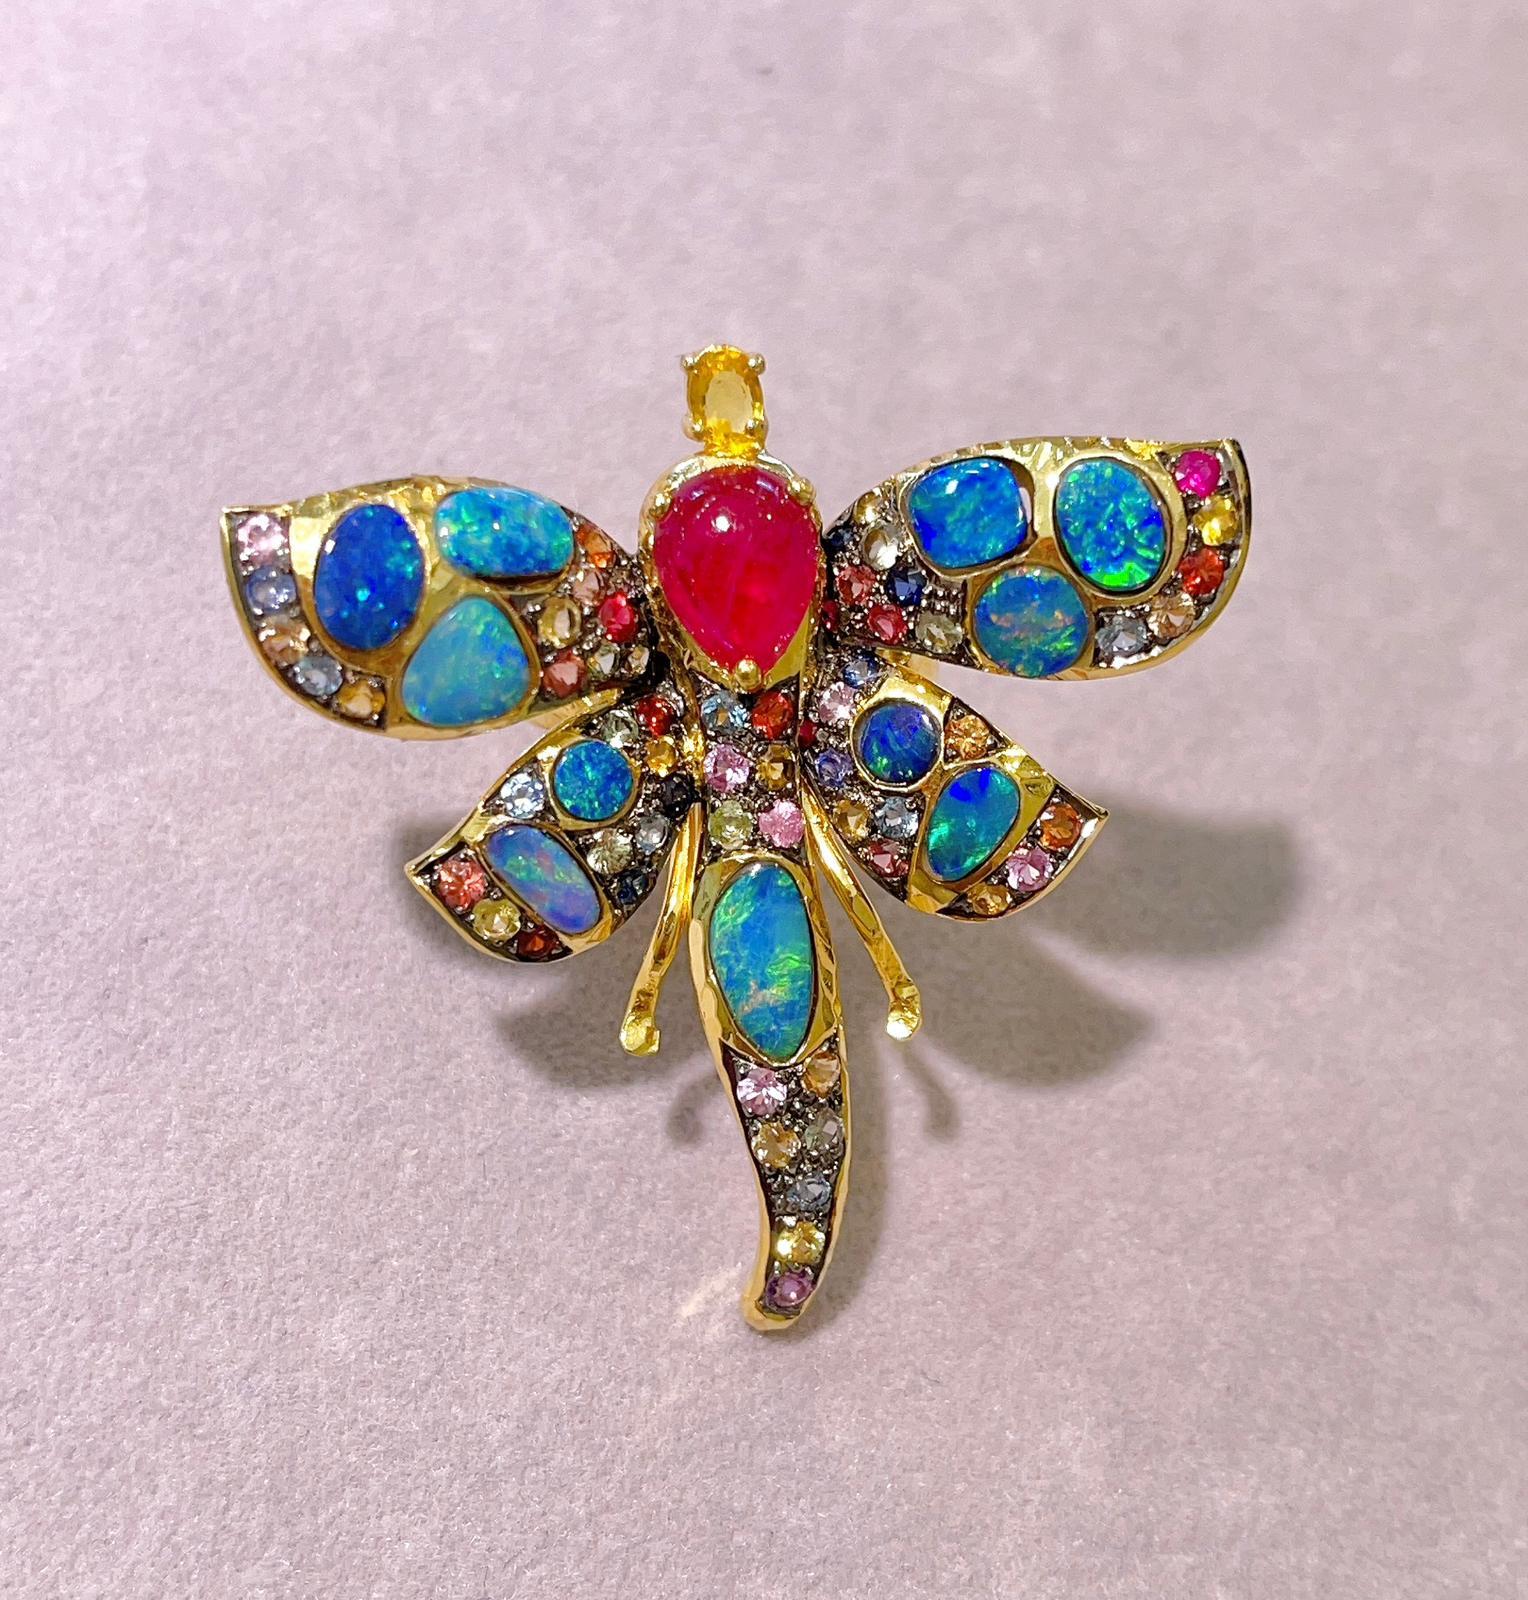 Cabochon Bochic “Capri” Opal & Ruby & Sapphire Cocktail Ring Set in 22k Gold & Silver For Sale